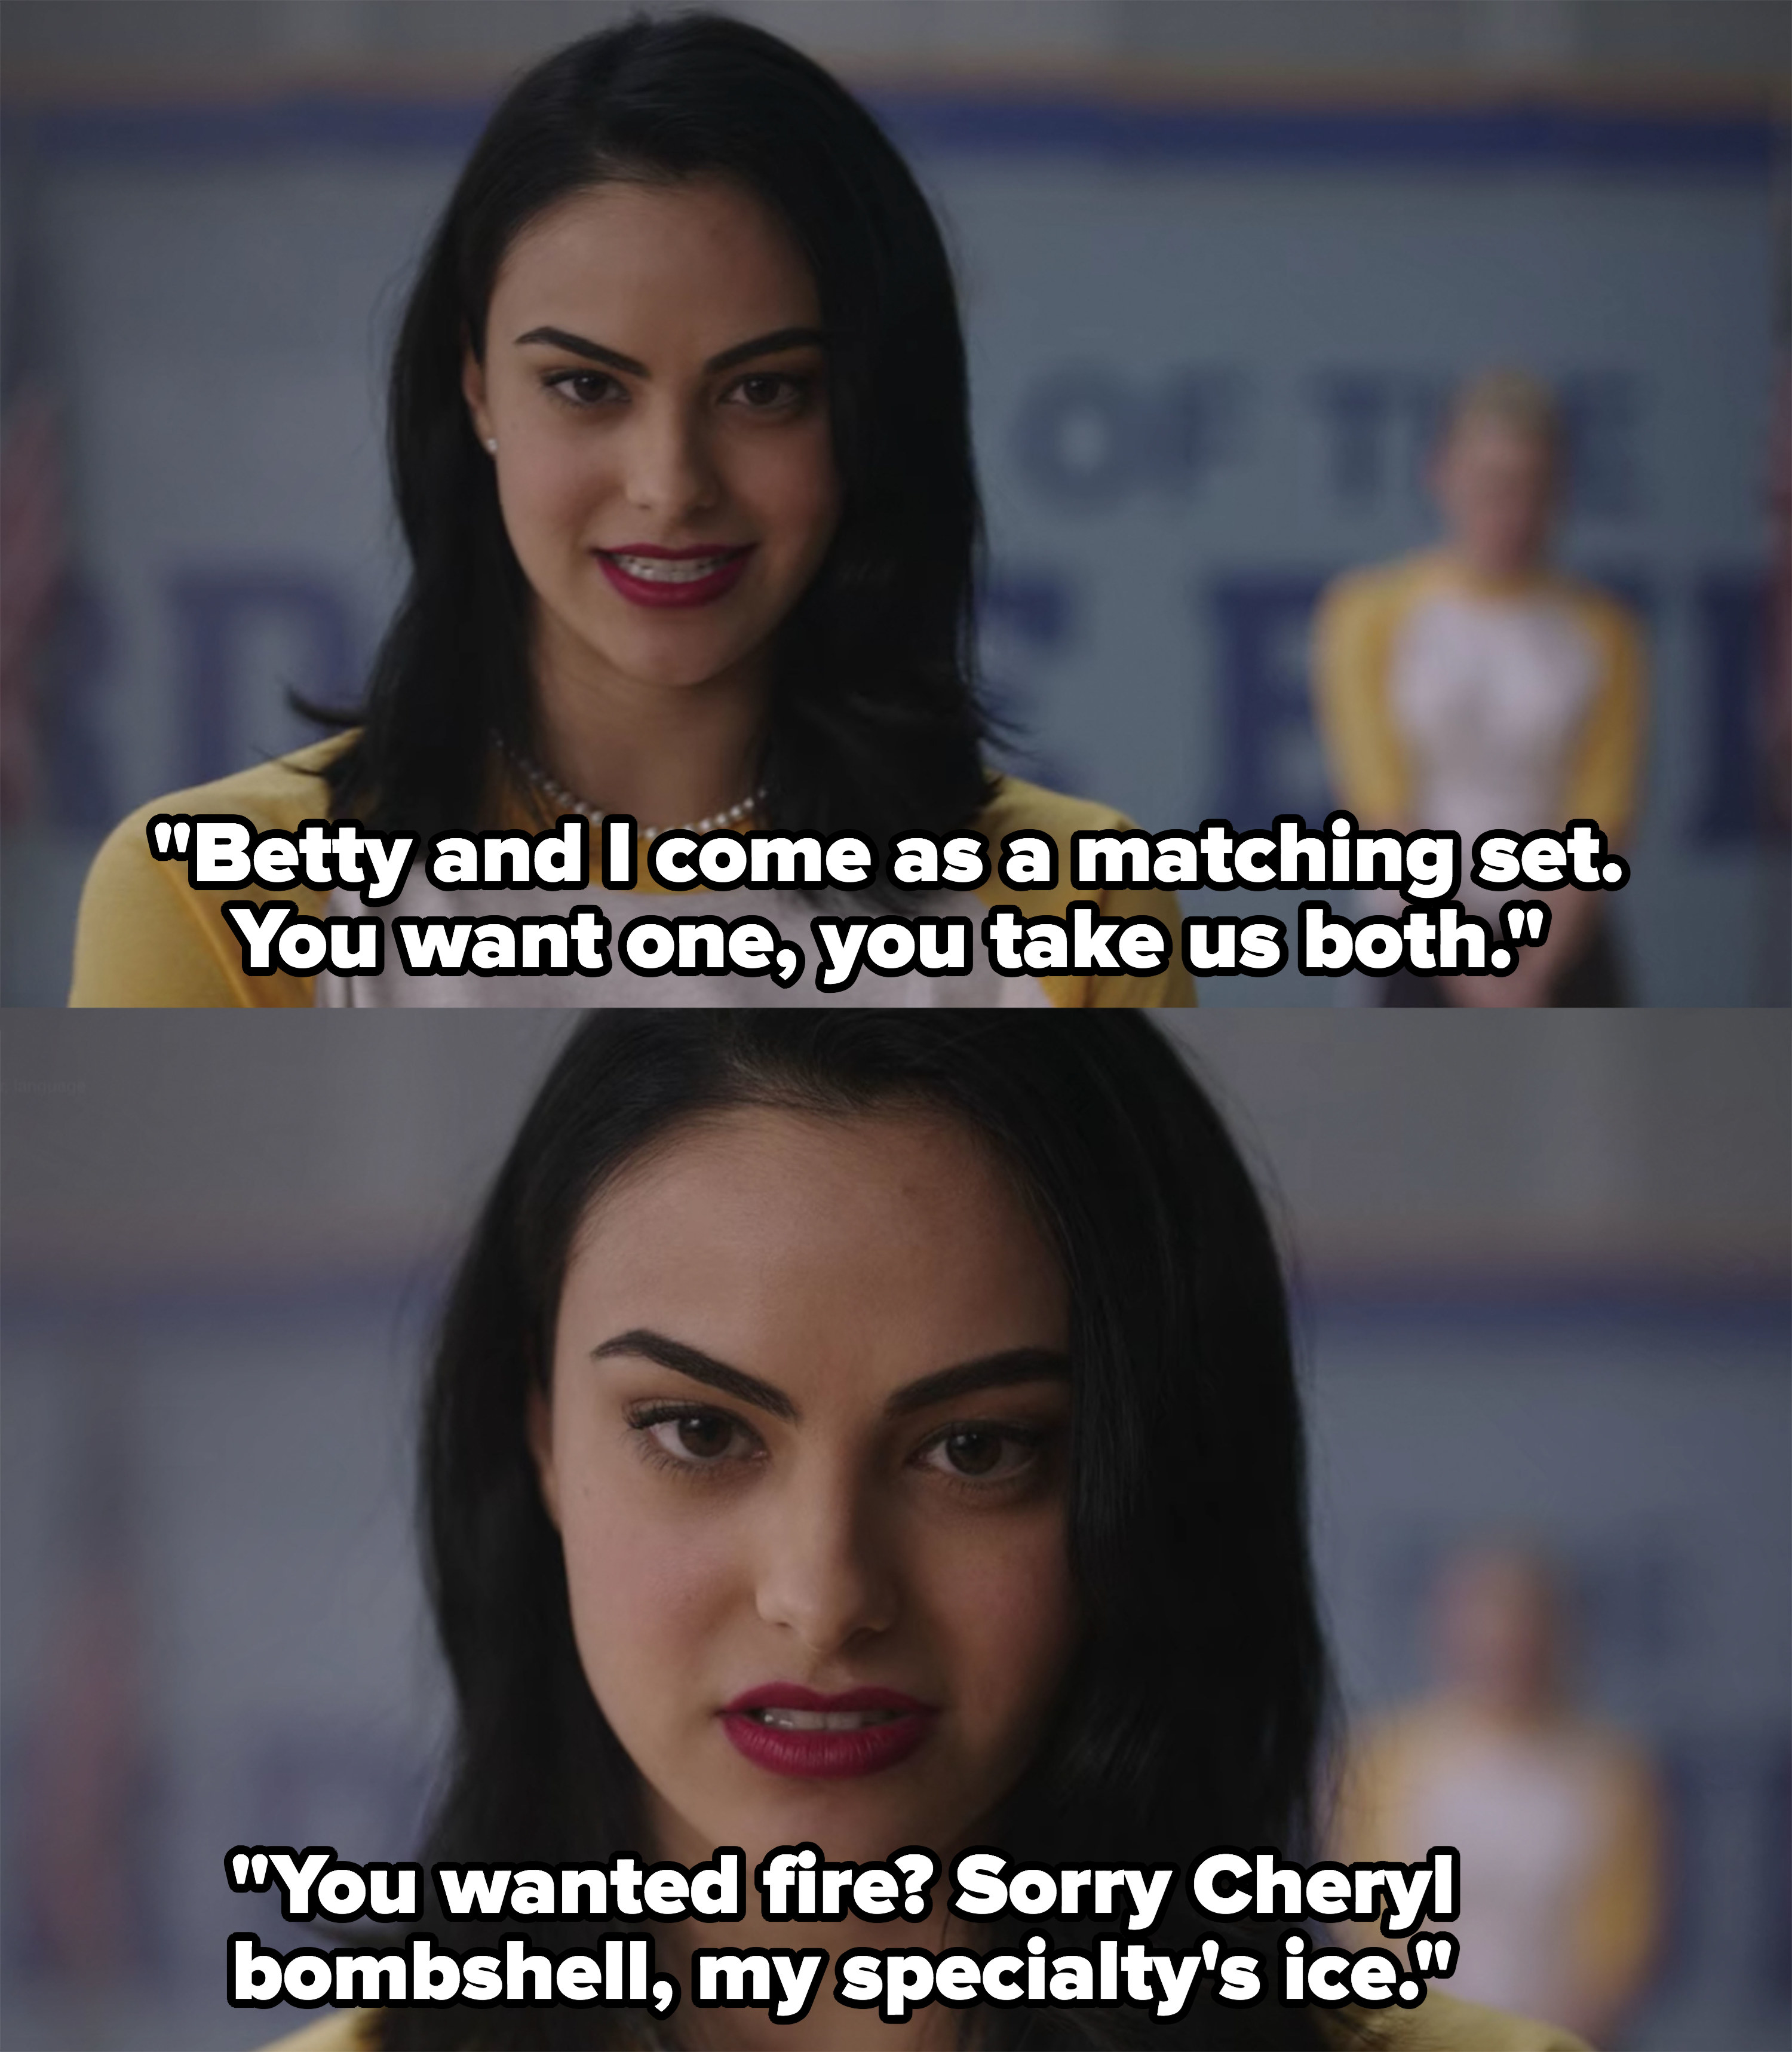 Veronica tells Cheryl she and Betty come as a matching set, &quot;You wanted fire? Sorry Cheryl bombshell my specialty&#x27;s ice&quot;